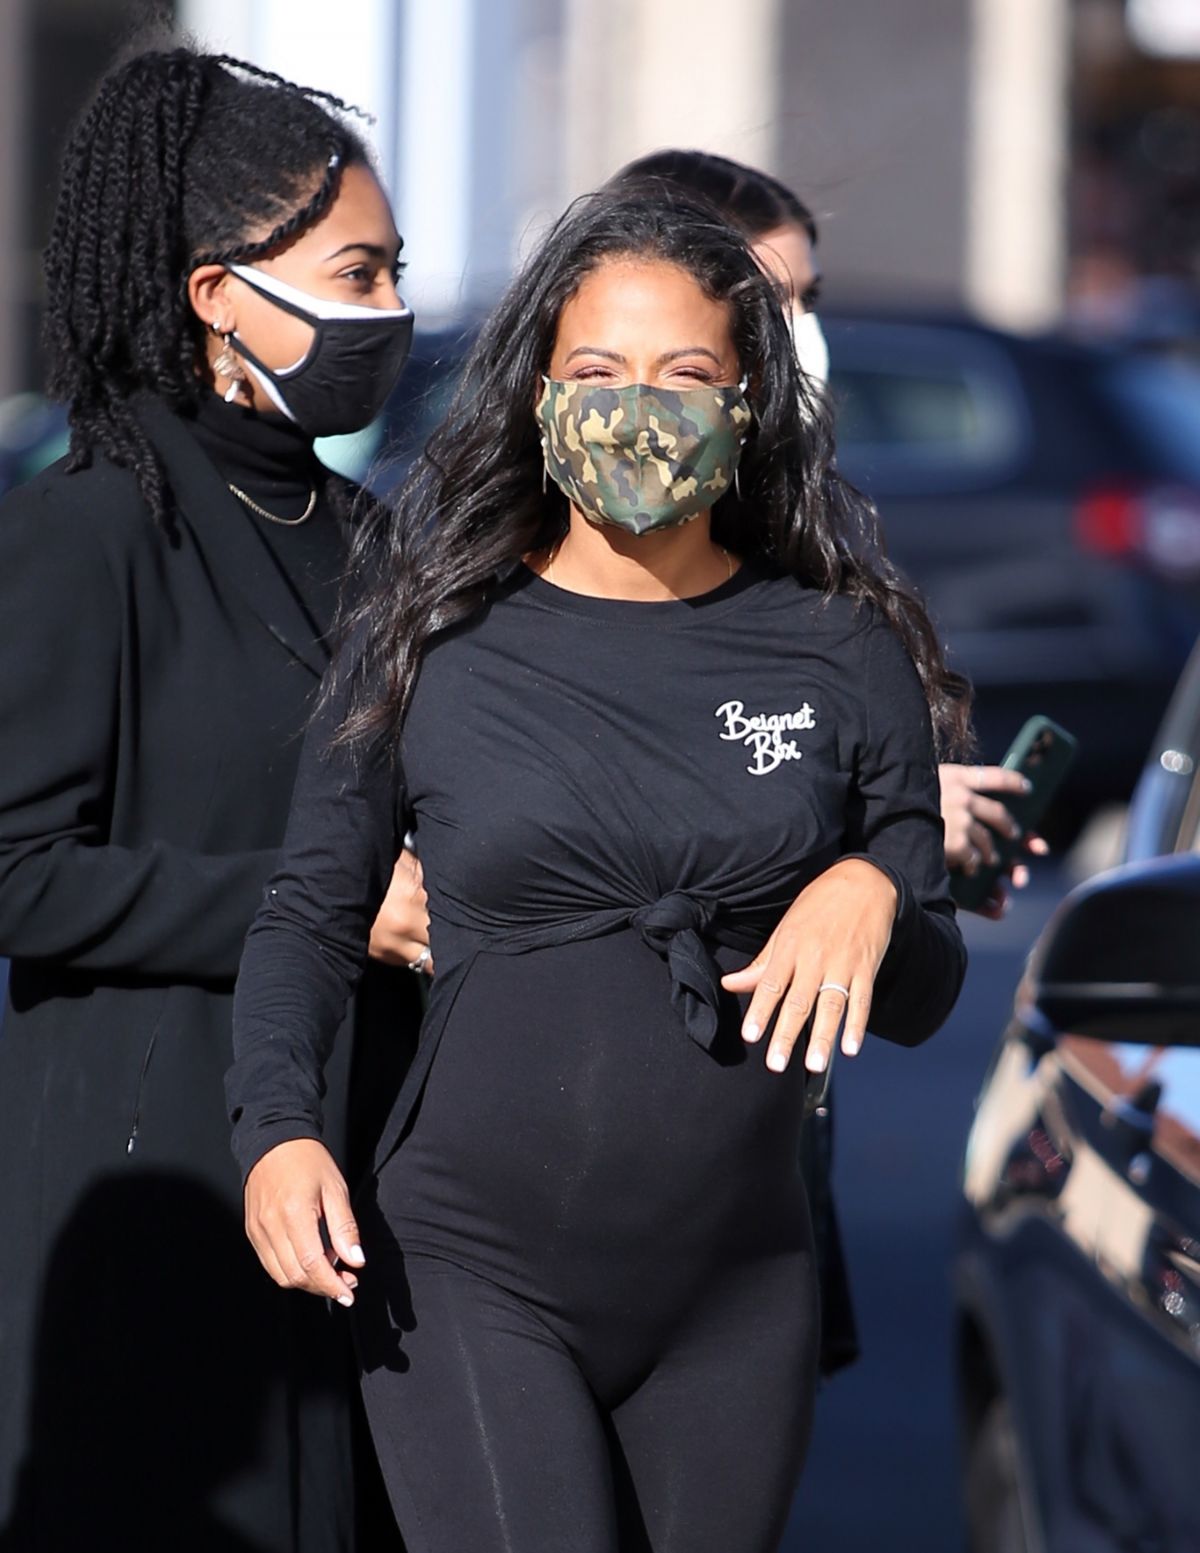 christina-milian-and-draya-michele-out-in-los-angeles-12-14-2020-7.jpg